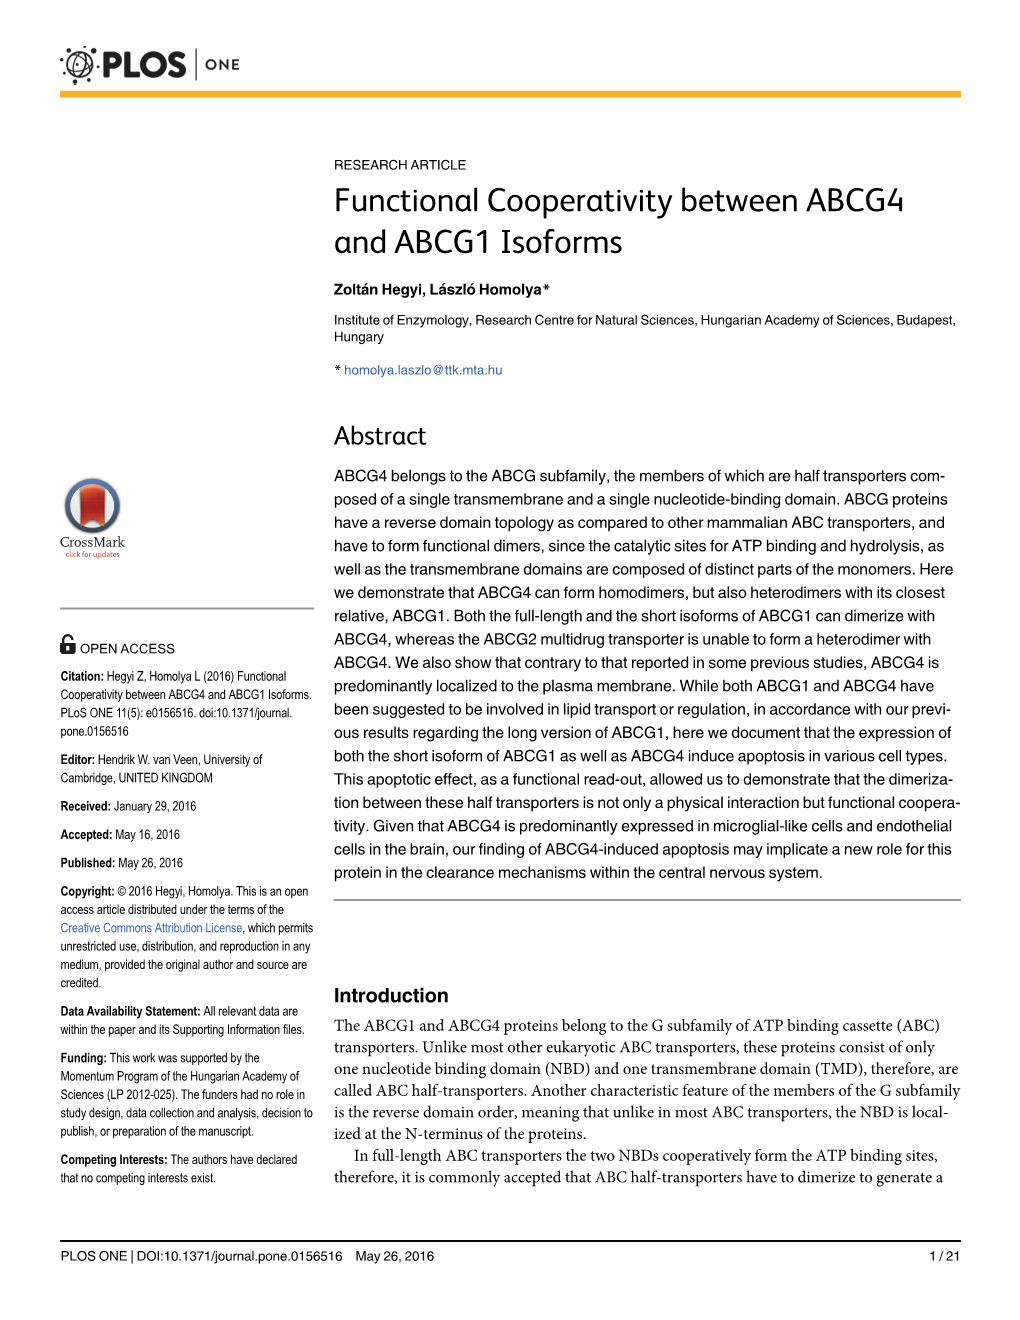 Functional Cooperativity Between ABCG4 and ABCG1 Isoforms